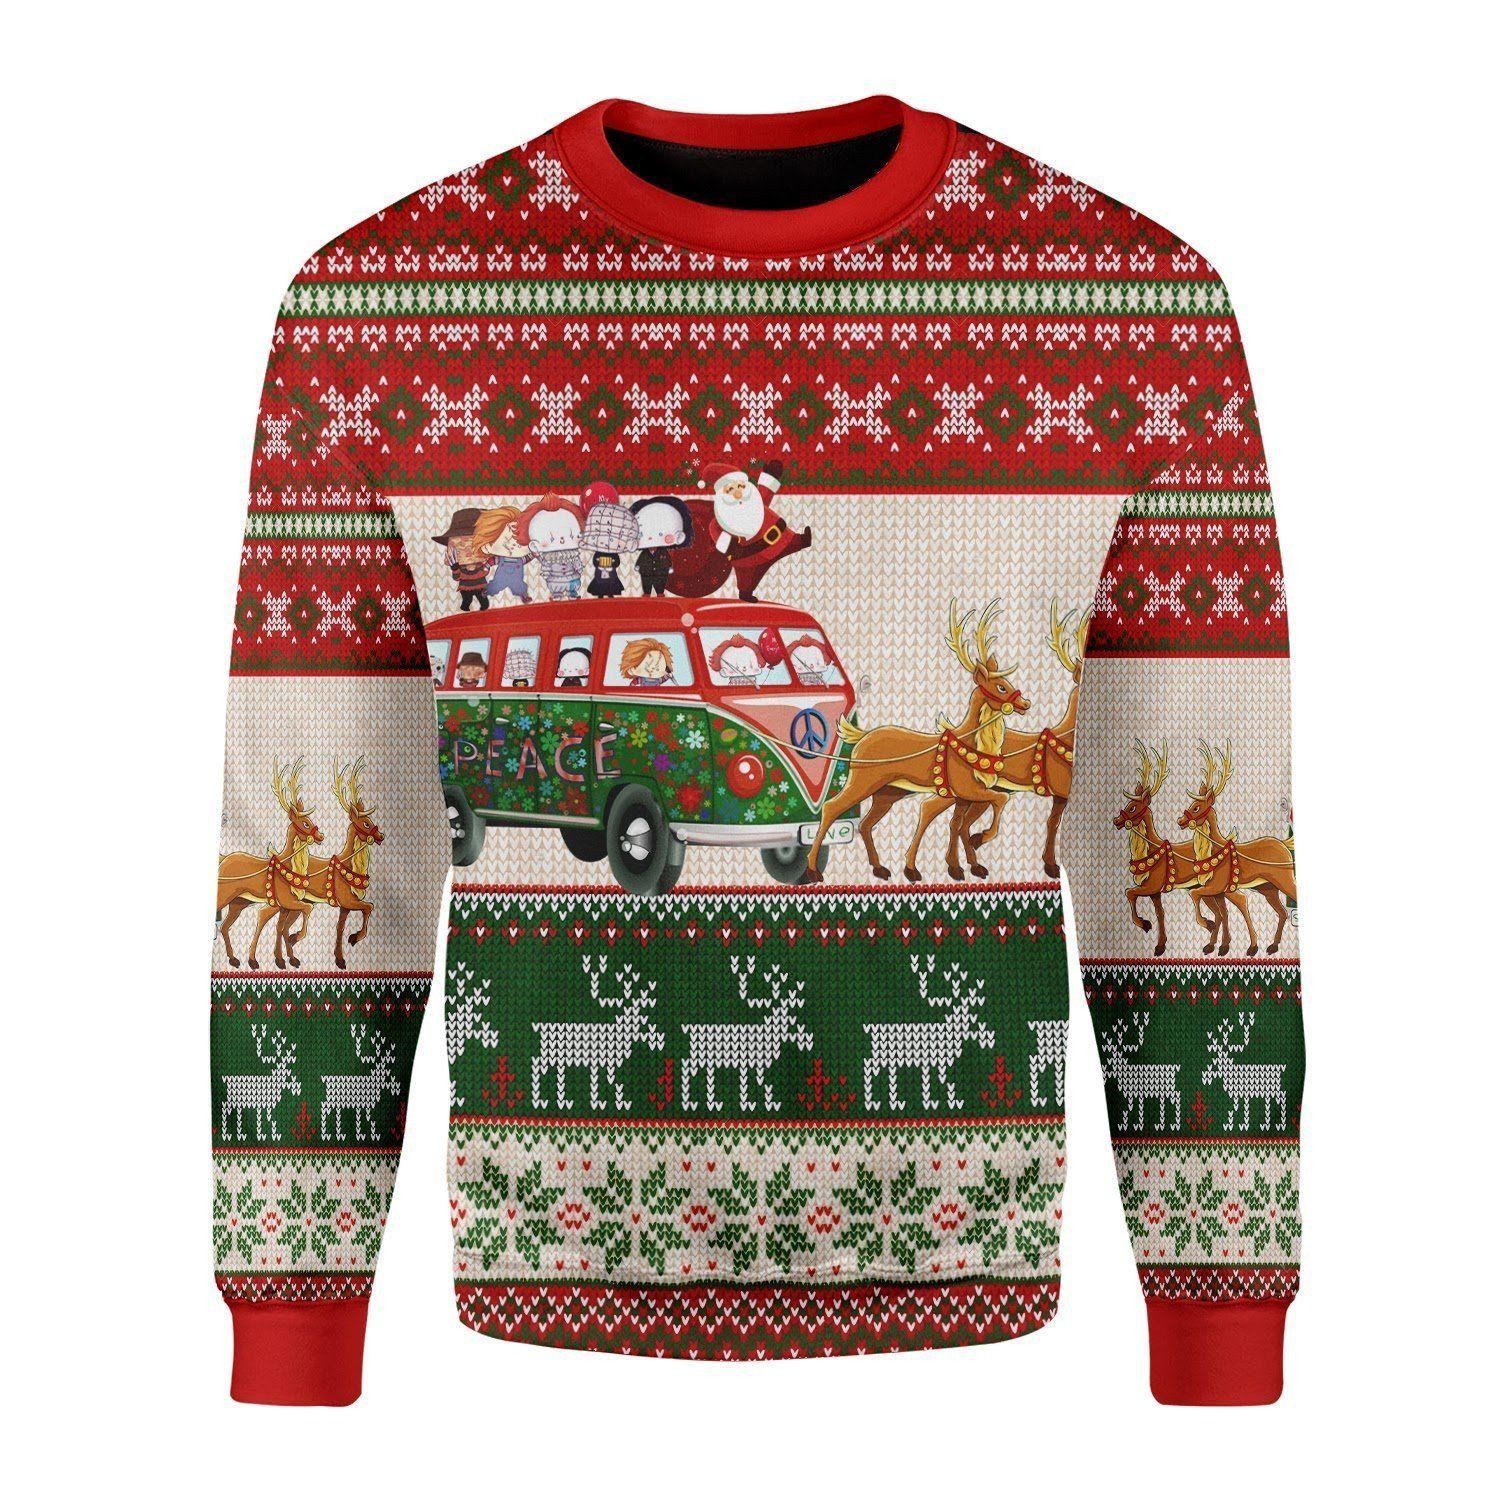 Christmas Snowflake Pattern Bus Santa Claus And Kids Sleigh Pulled By Reinder For Unisex Ugly Christmas Sweater, All Over Print Sweatshirt